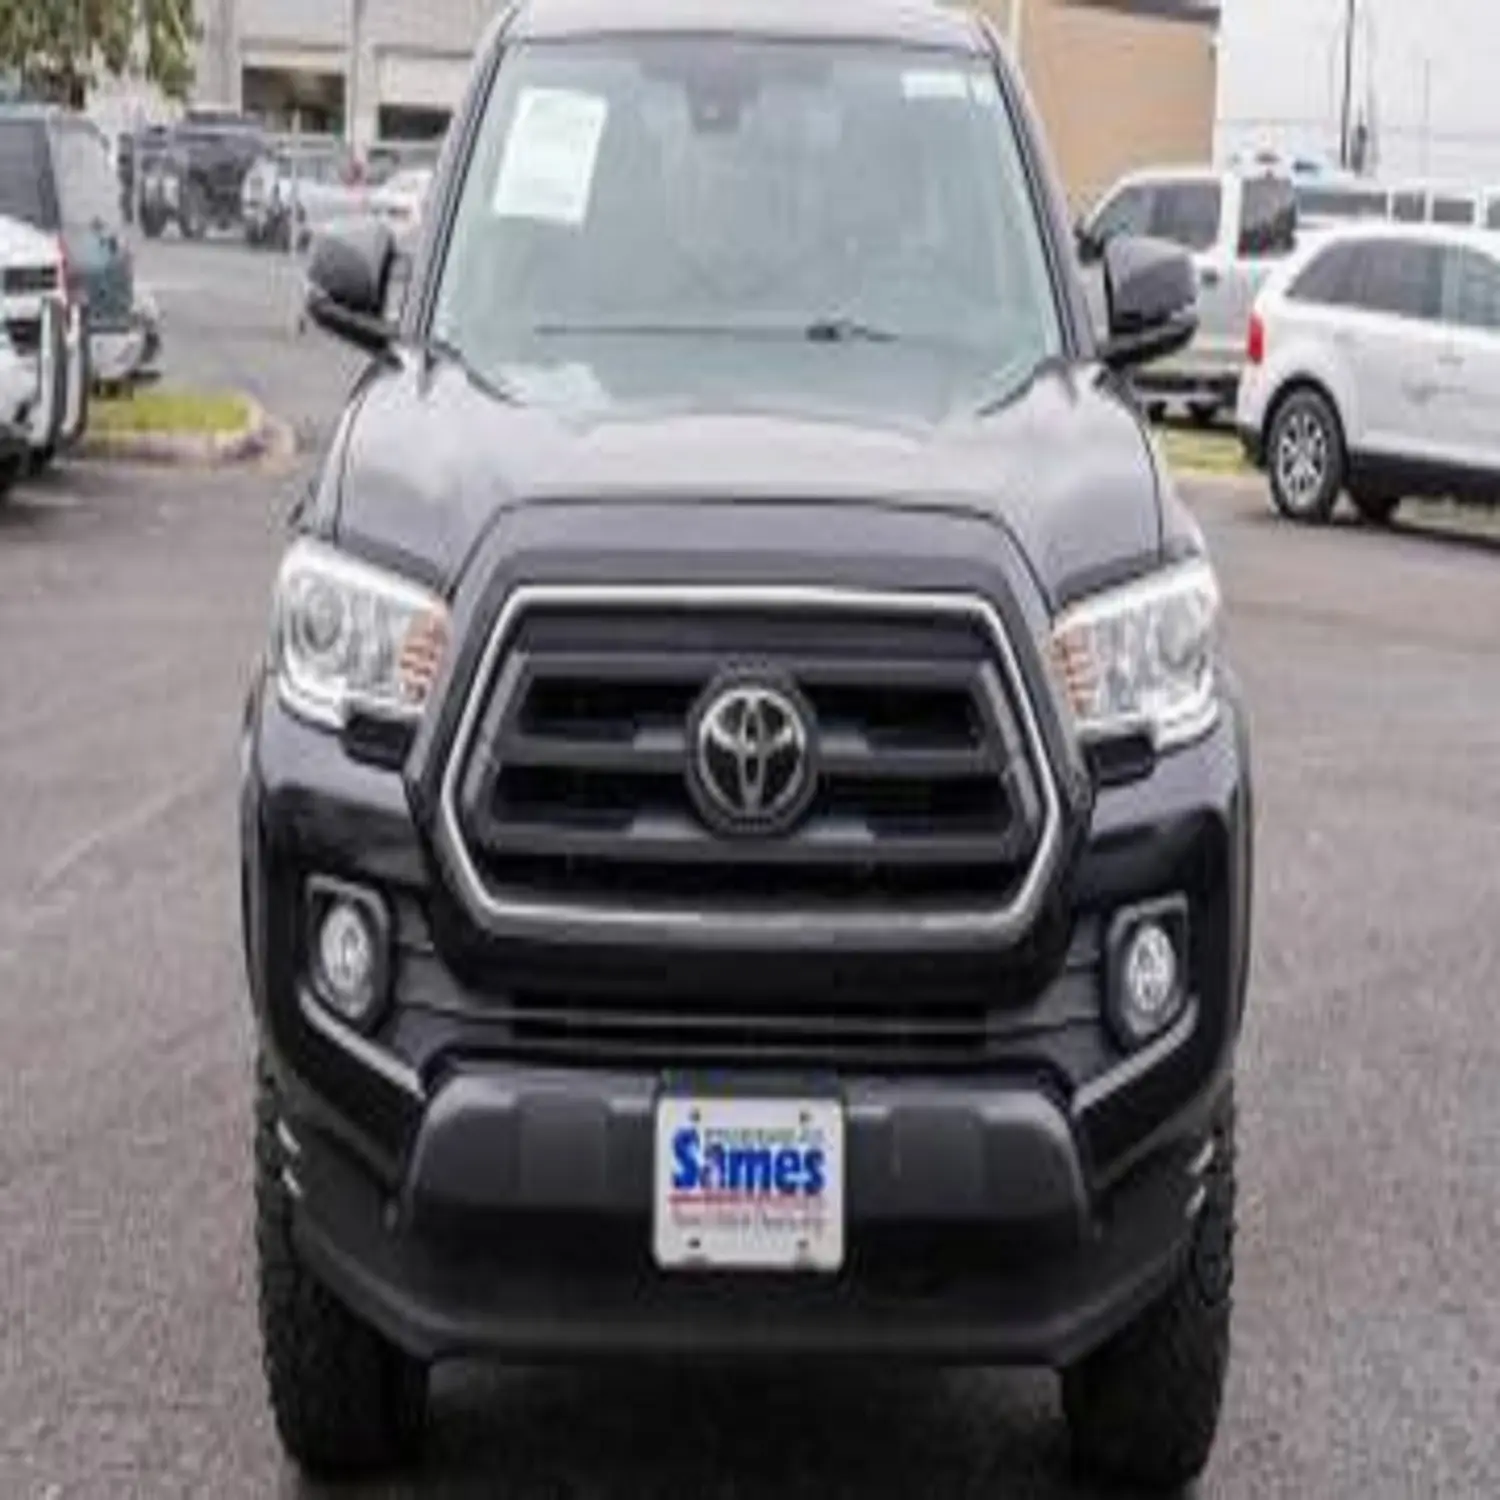 FAST DELIVERY 2020 USED TOYOTA TACOMA SR5 DOUBLE CABIN READY TO SHIP ACCIDENT-FREE RHD&LHD AVAILABLE